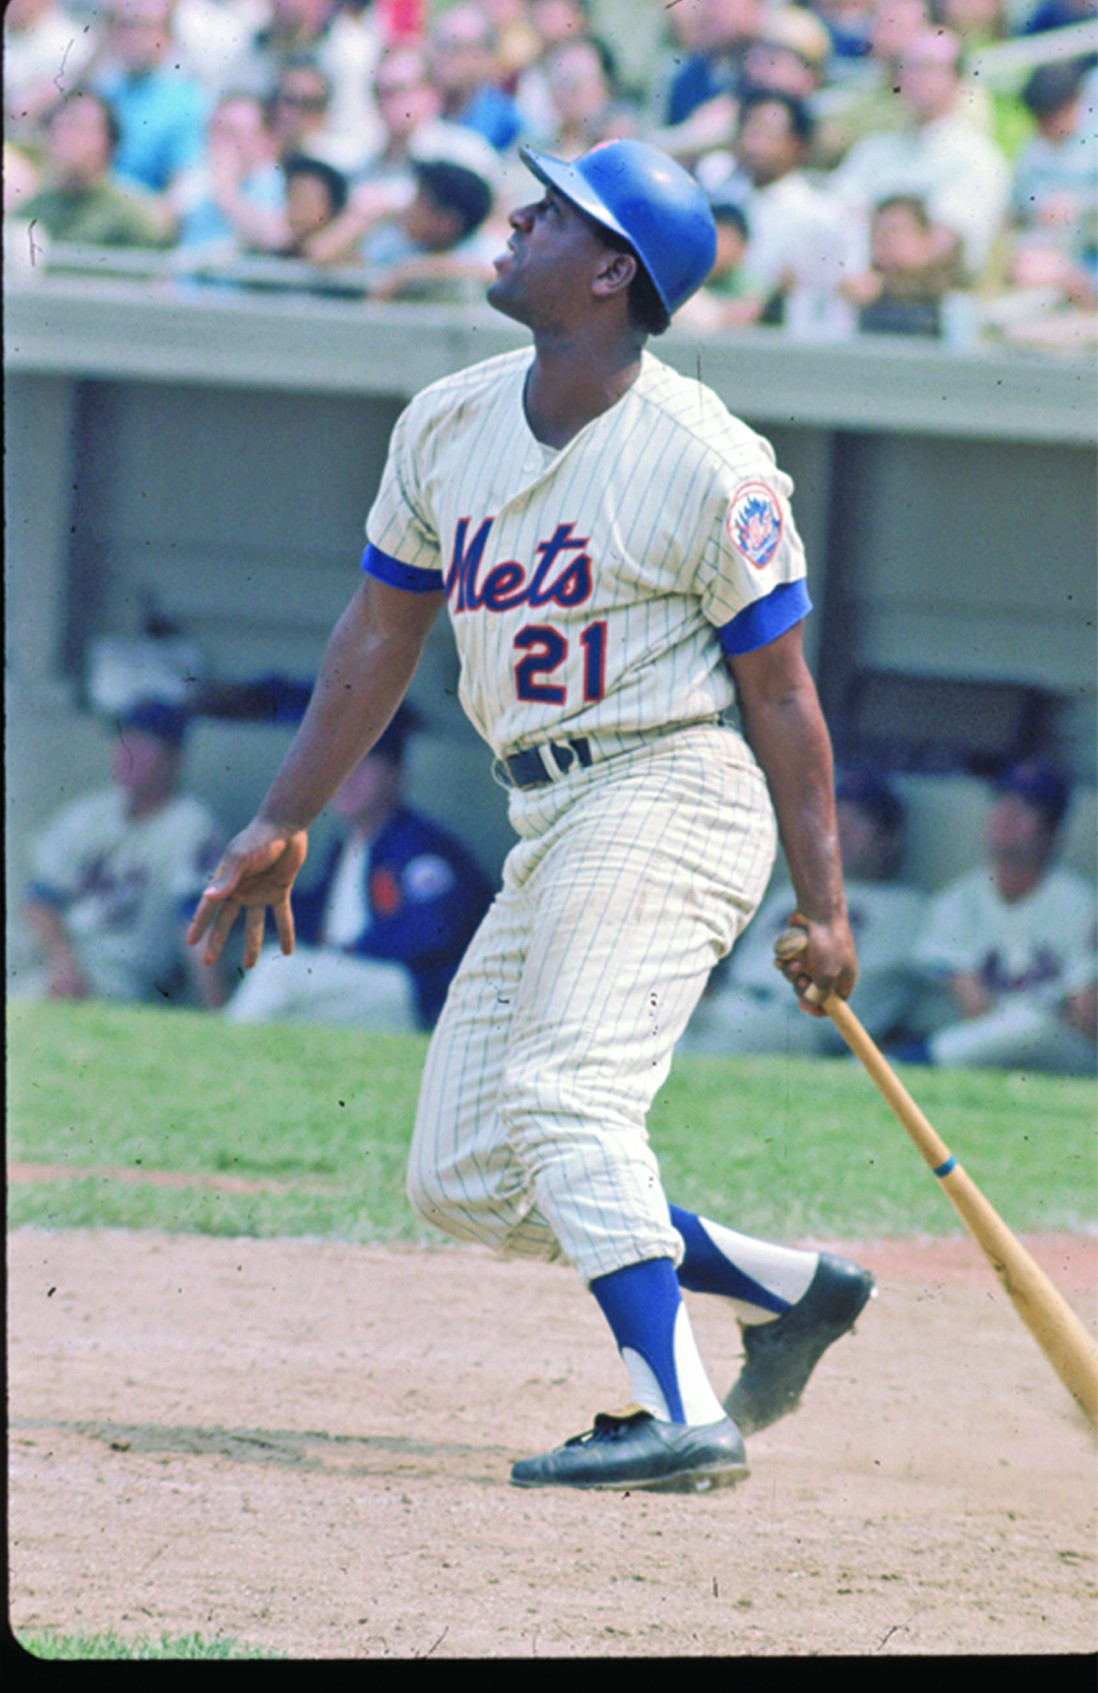 New York Mets' Cleon Jones reacts after making contact with the ball during the 1969 World Series. Photo Courtesy of Mets Insider